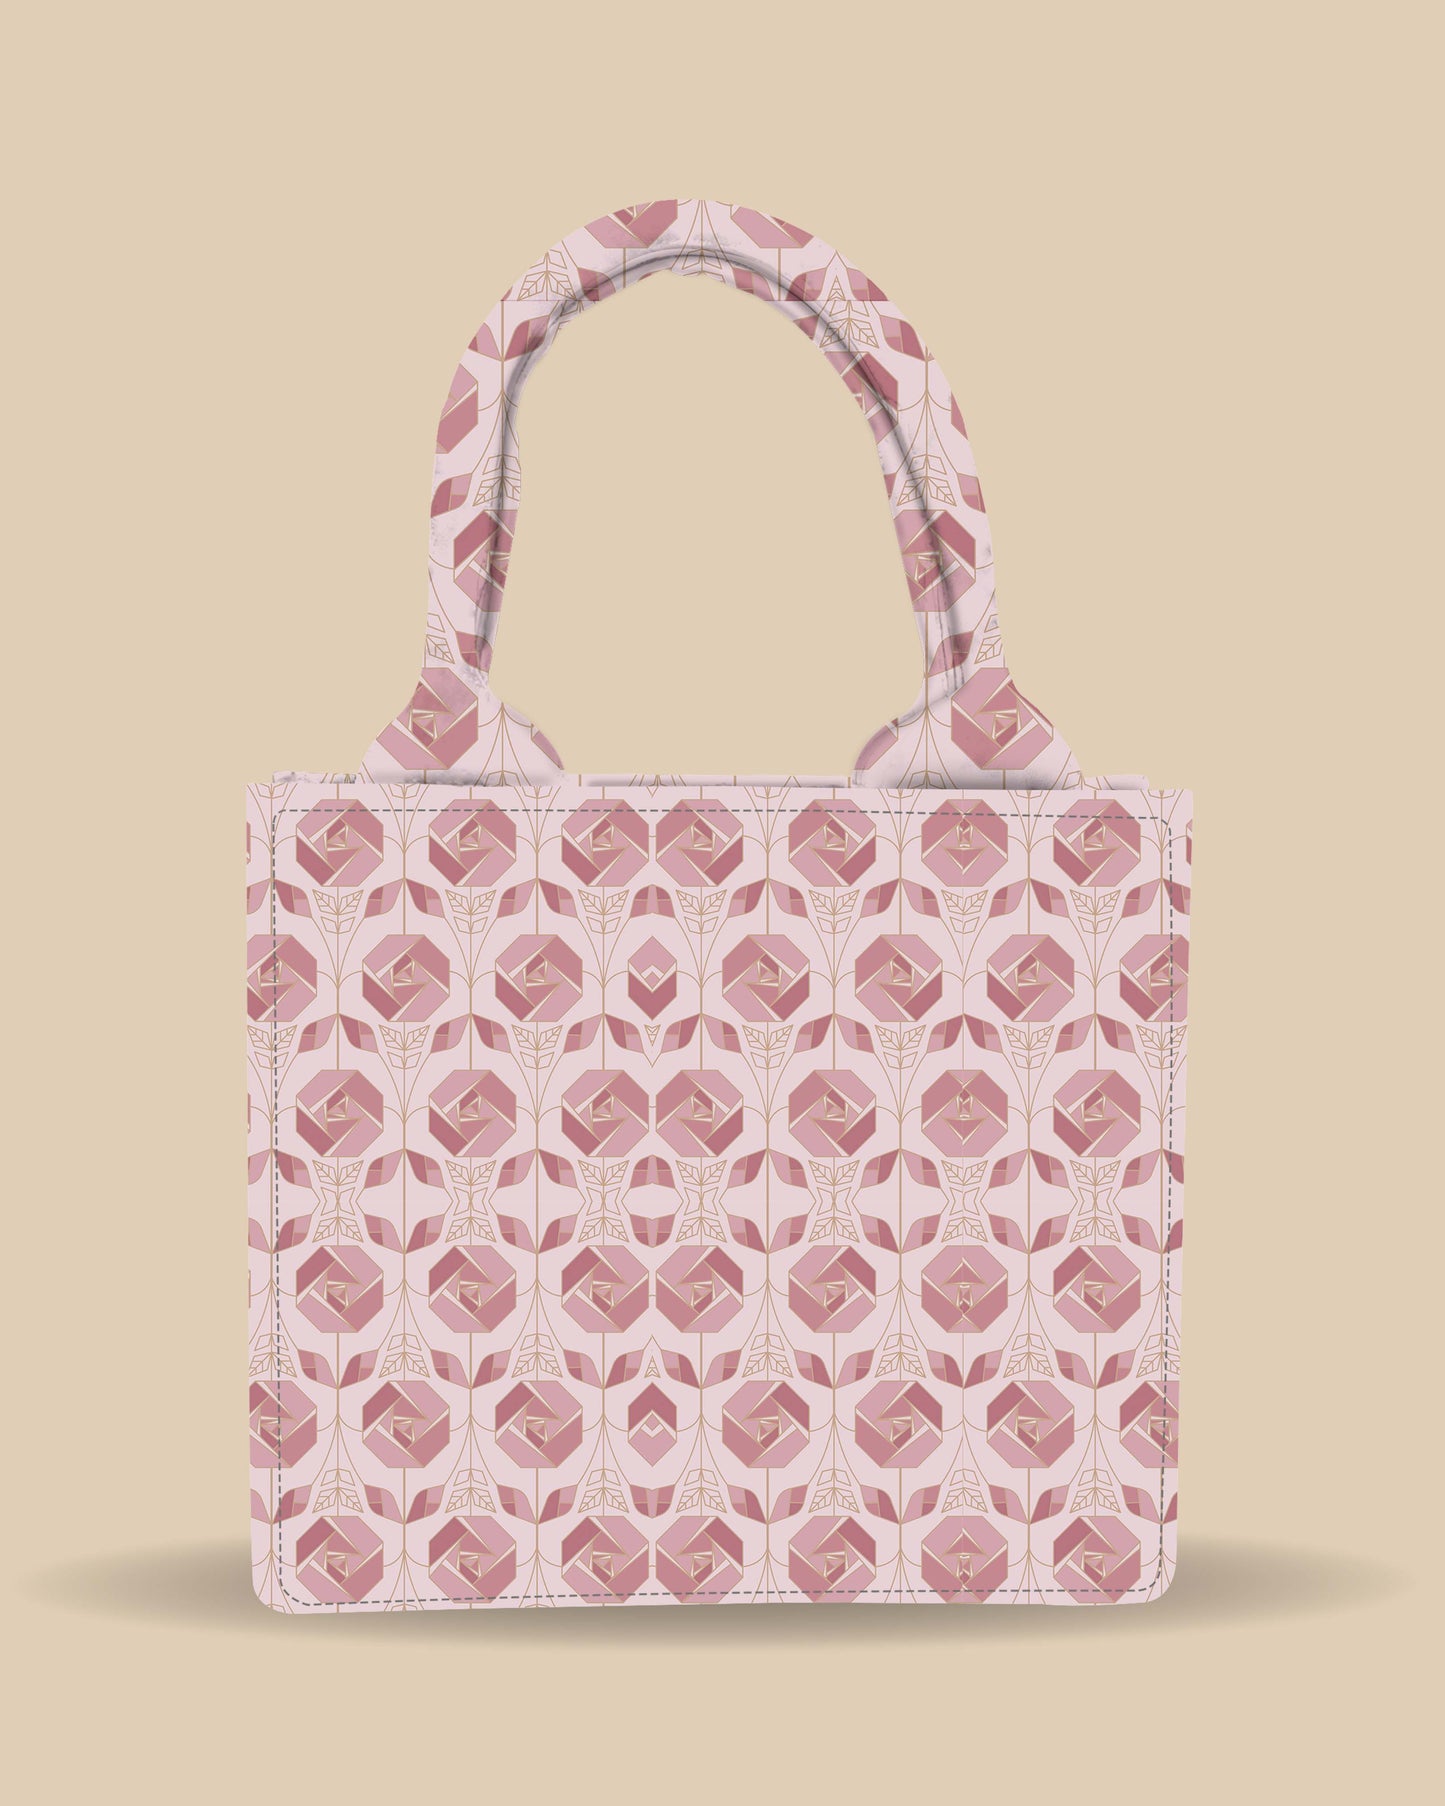 Customized Small Tote Bag Designed with Calligraphy Roses And Leaves